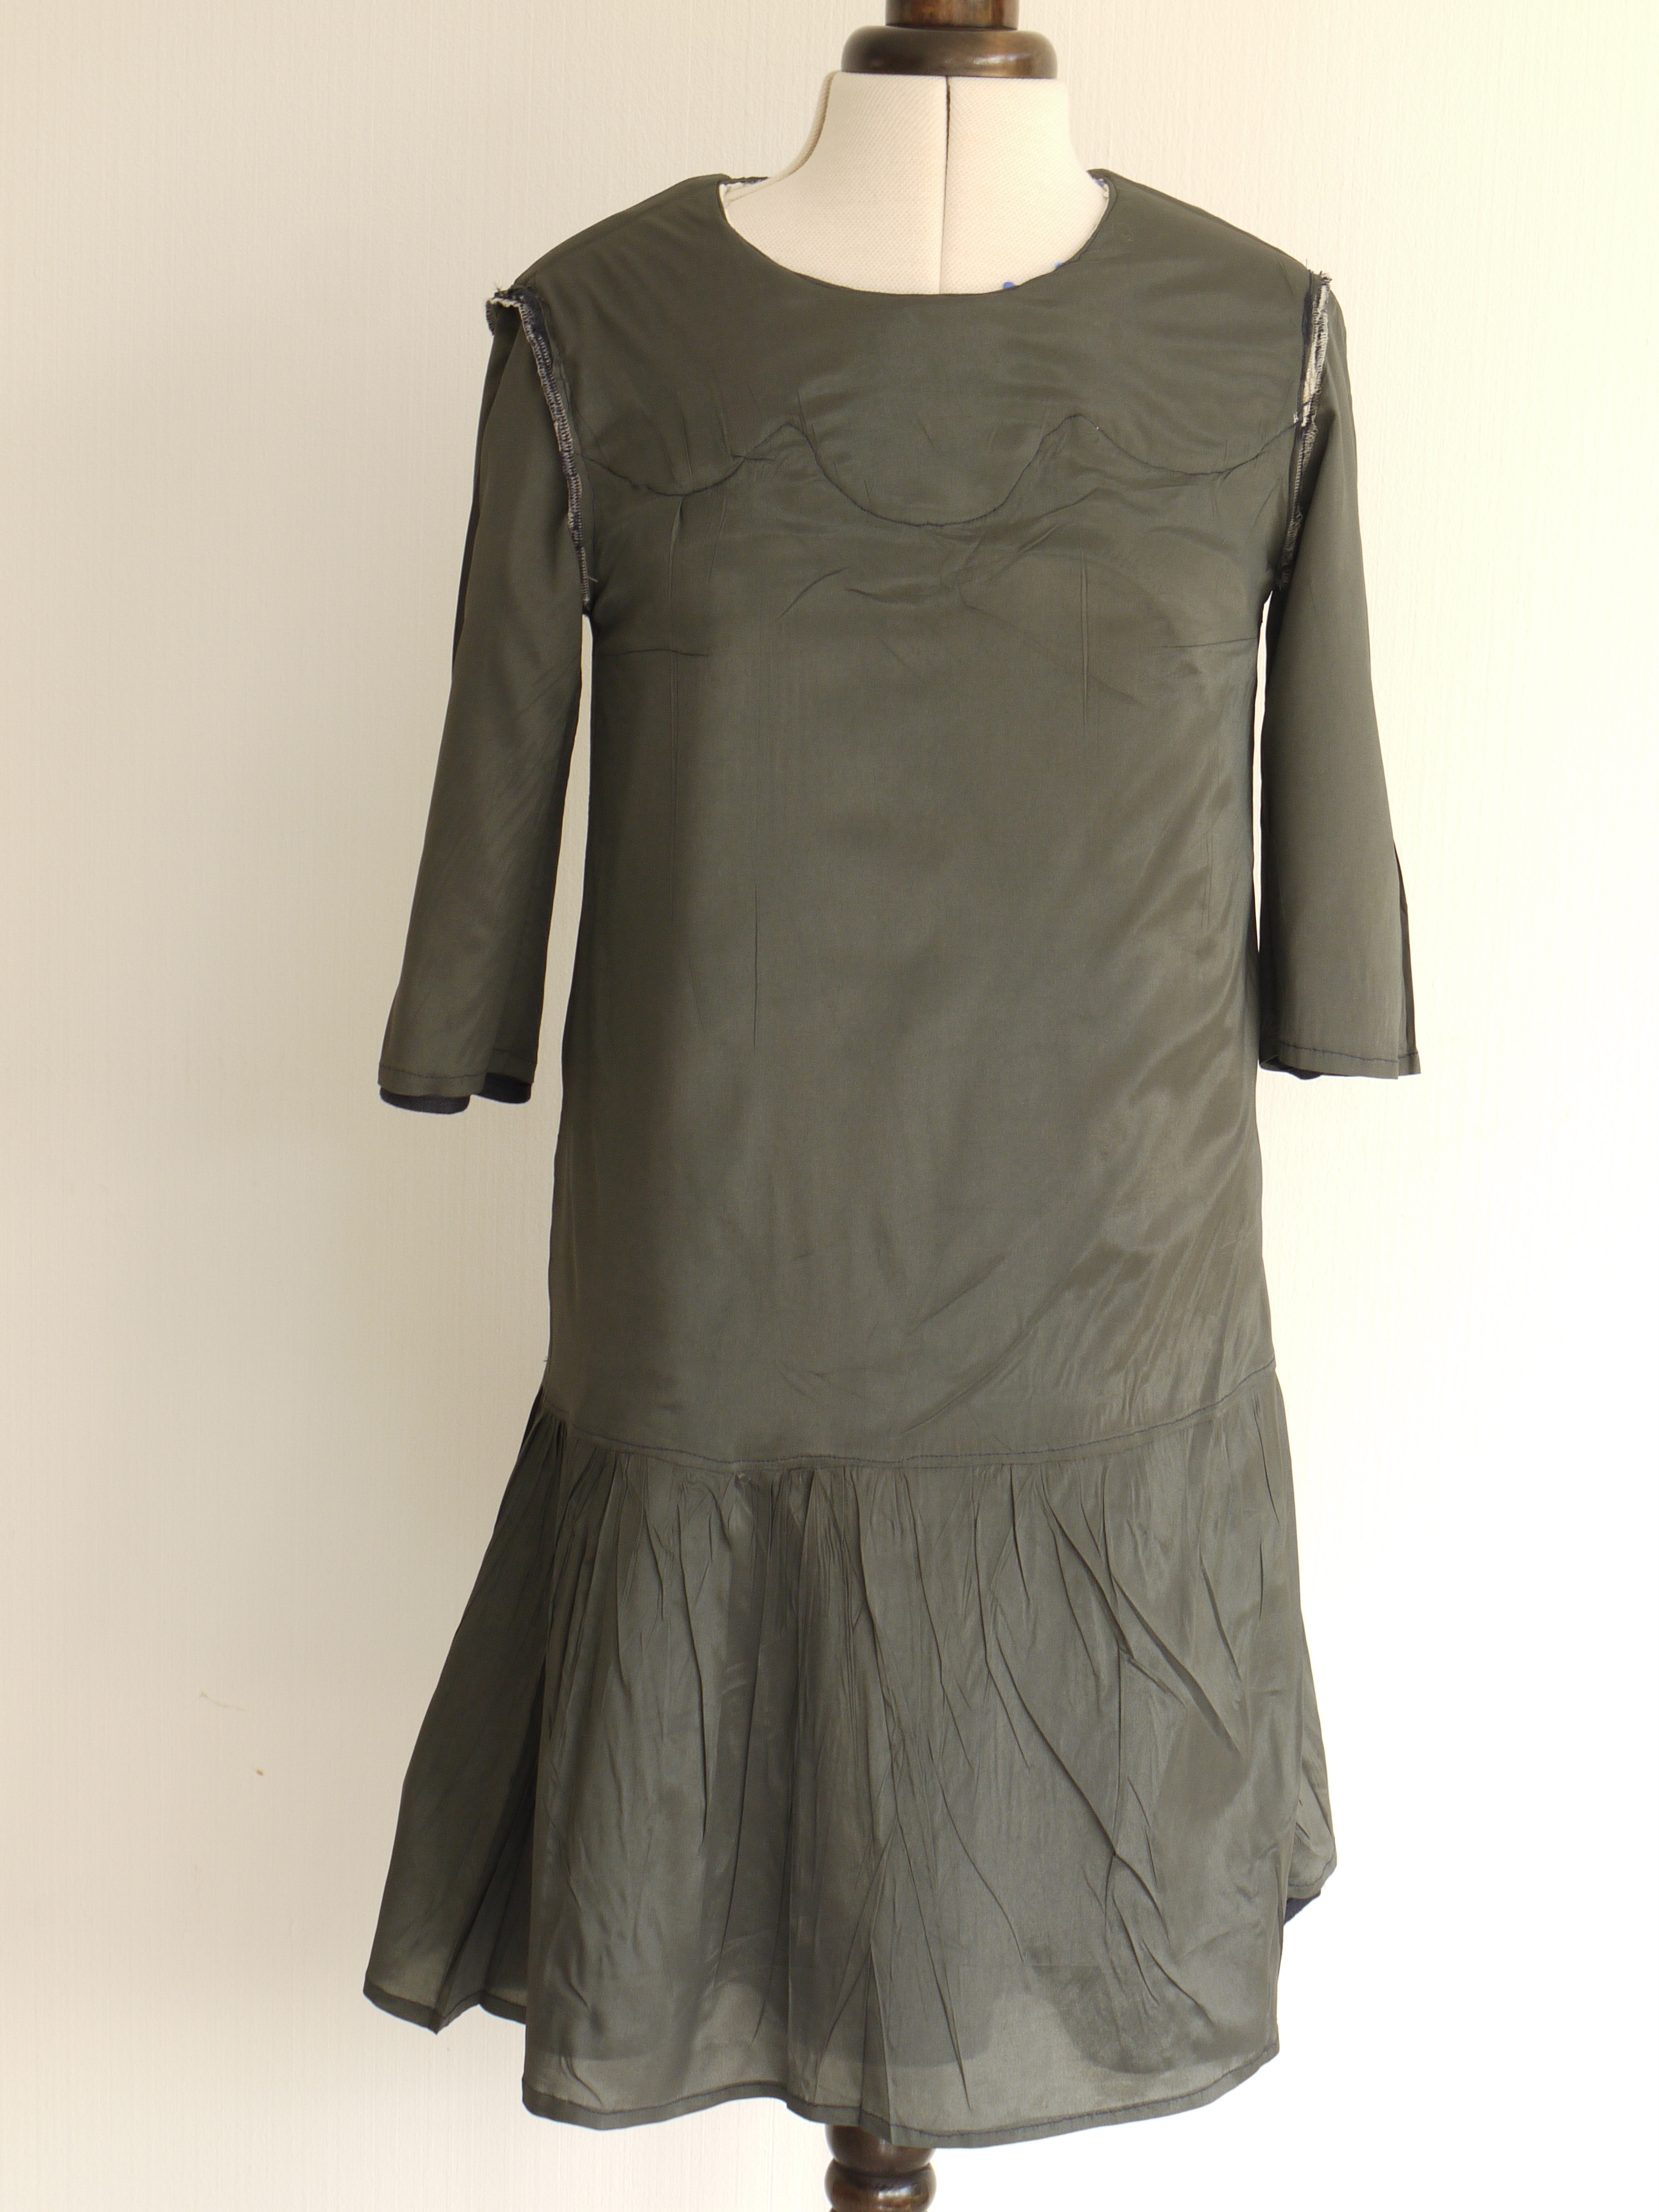 Dress fully lined with viscose lining fabric